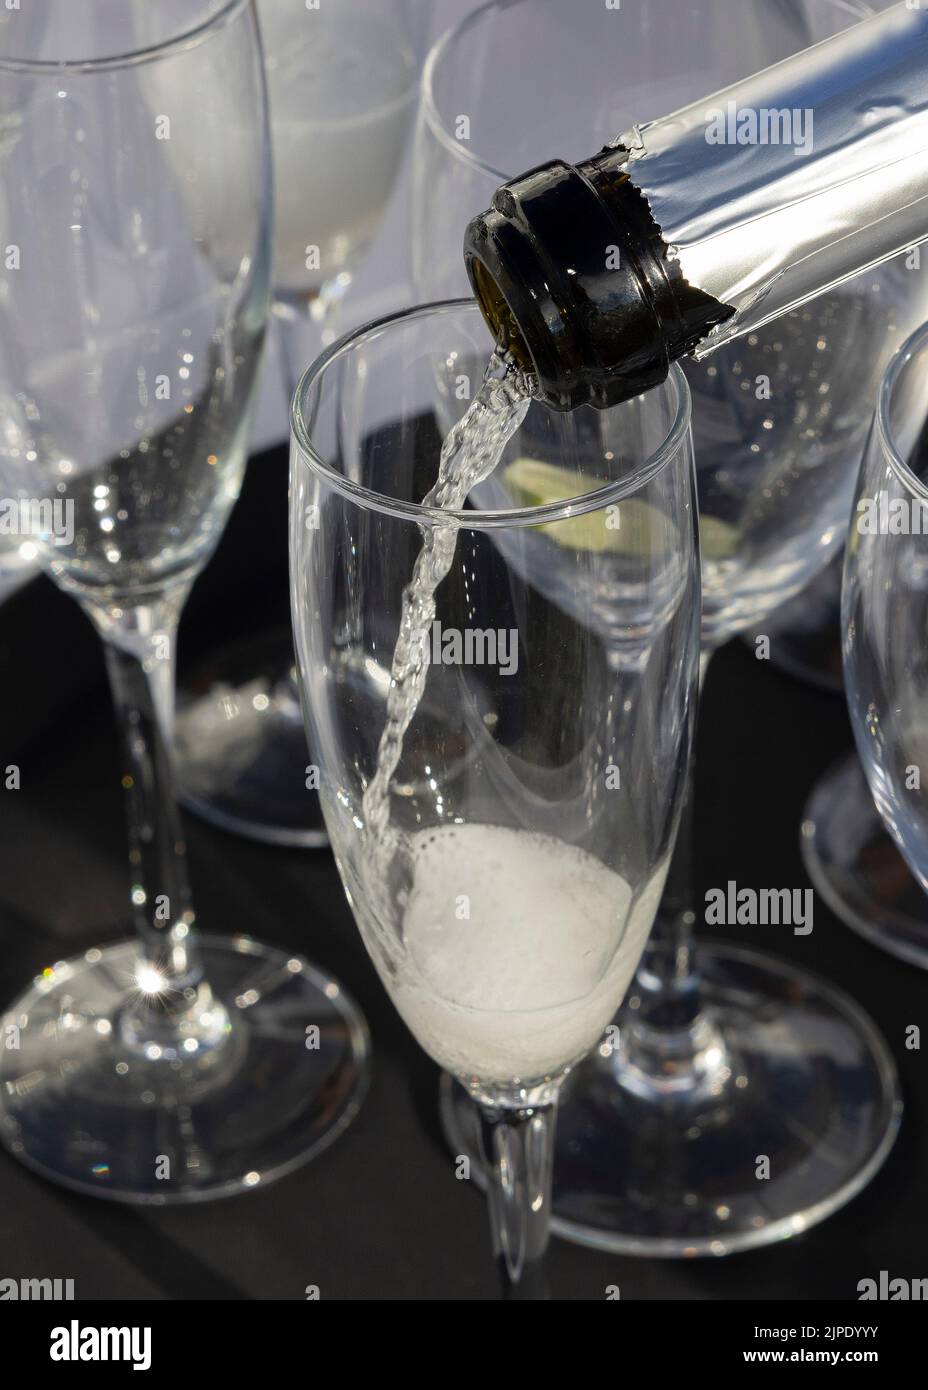 Glasses of Prosecco sparkling white wine poured at an event or social occasion Stock Photo